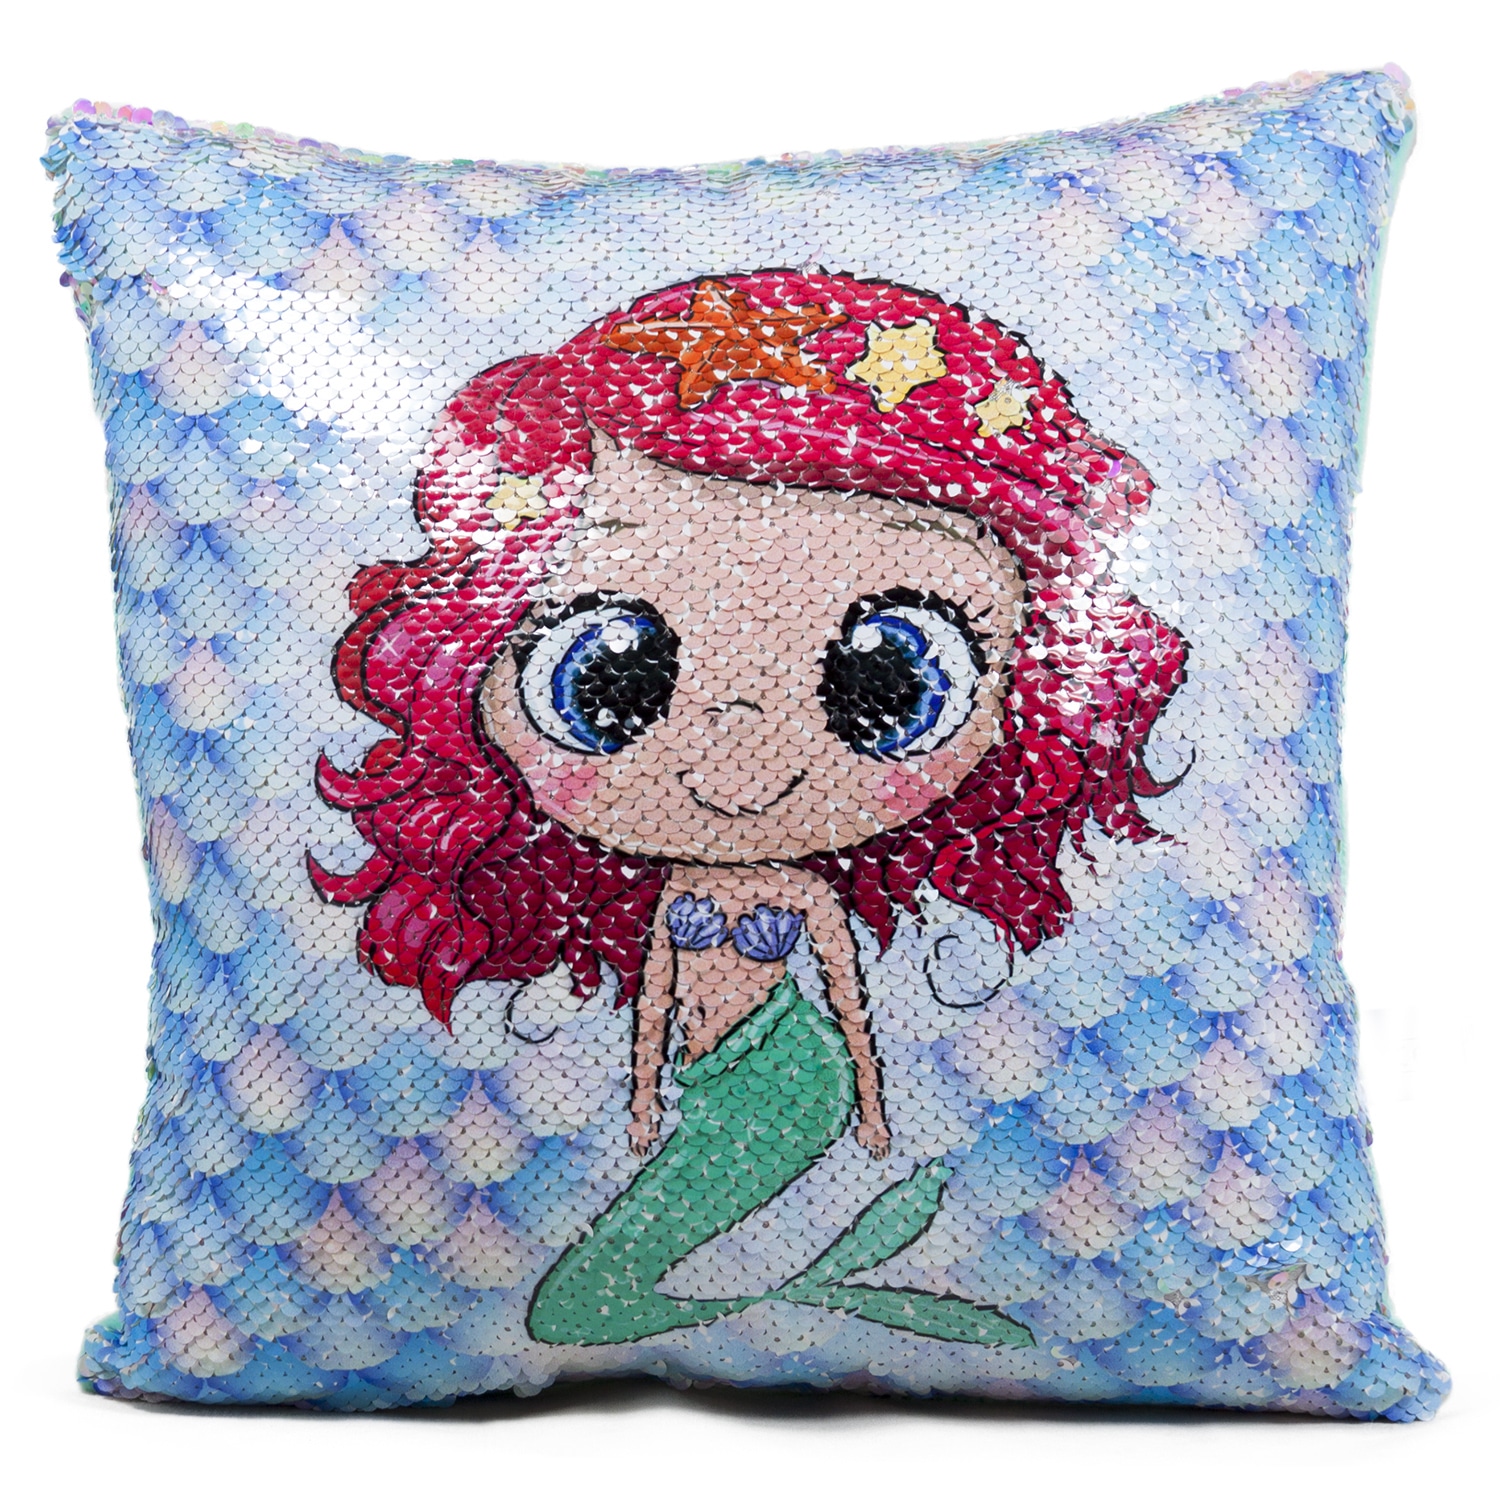 Pillow with mermaid and sequins